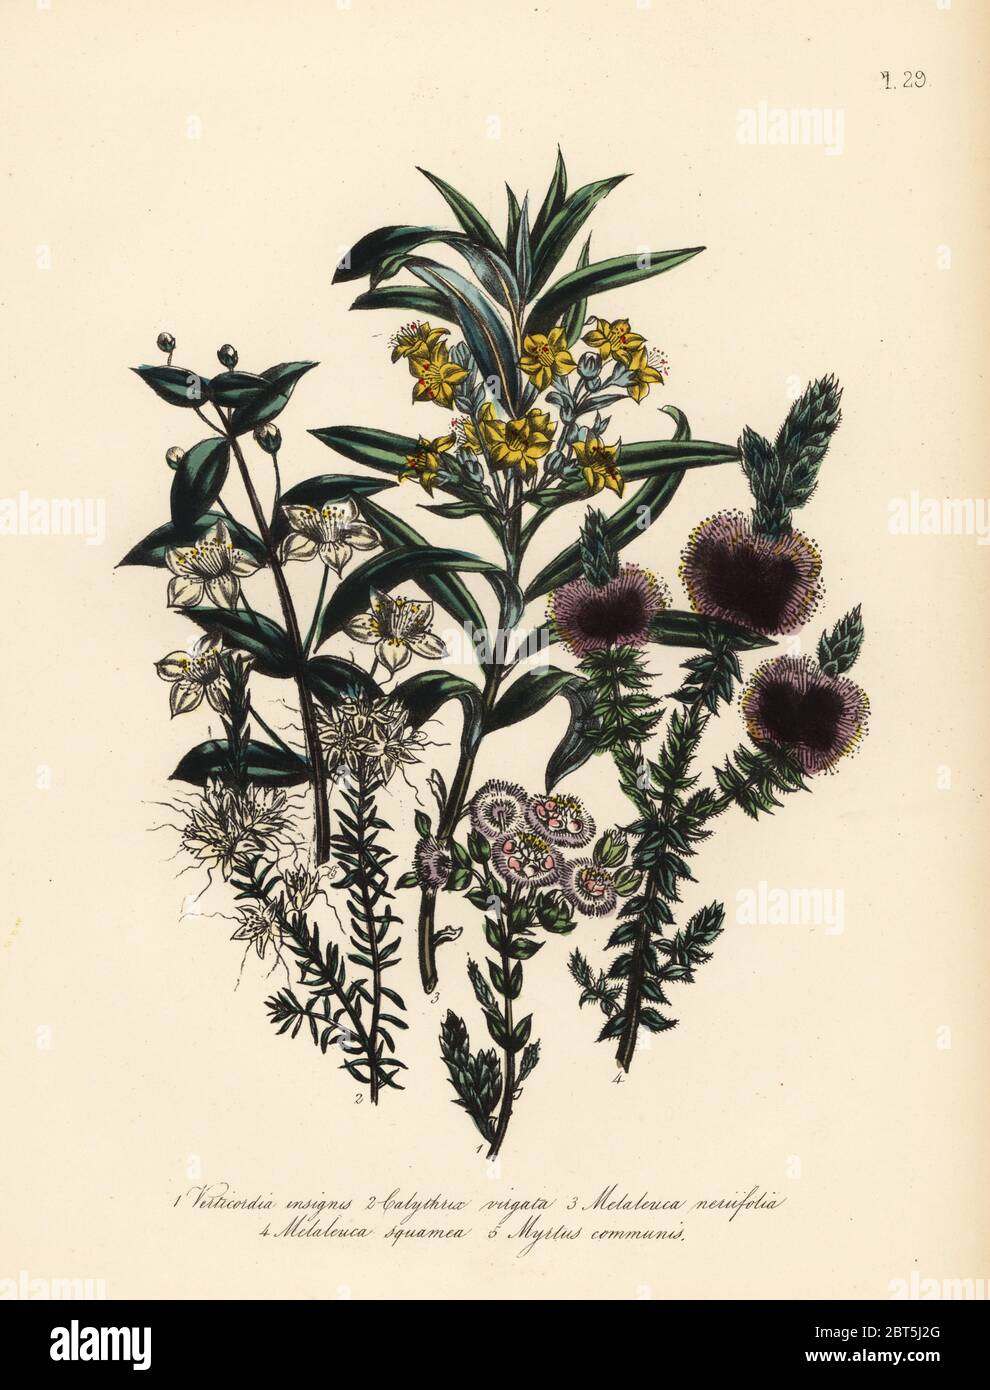 Splended fringe myrtle, Verticordia insignia, twiggy calythrix, Calythrix virgata, oleander-leaved melaleuca, Melaleuca neriifolia, scaly-branched melaleuca, Melaleuca squamea, and common myrtle, Myrtus communis. Handfinished chromolithograph by Henry Noel Humphreys after an illustration by Jane Loudon from Mrs. Jane Loudon's Ladies Flower Garden or Ornamental Greenhouse Plants, William S. Orr, London, 1849. Stock Photo